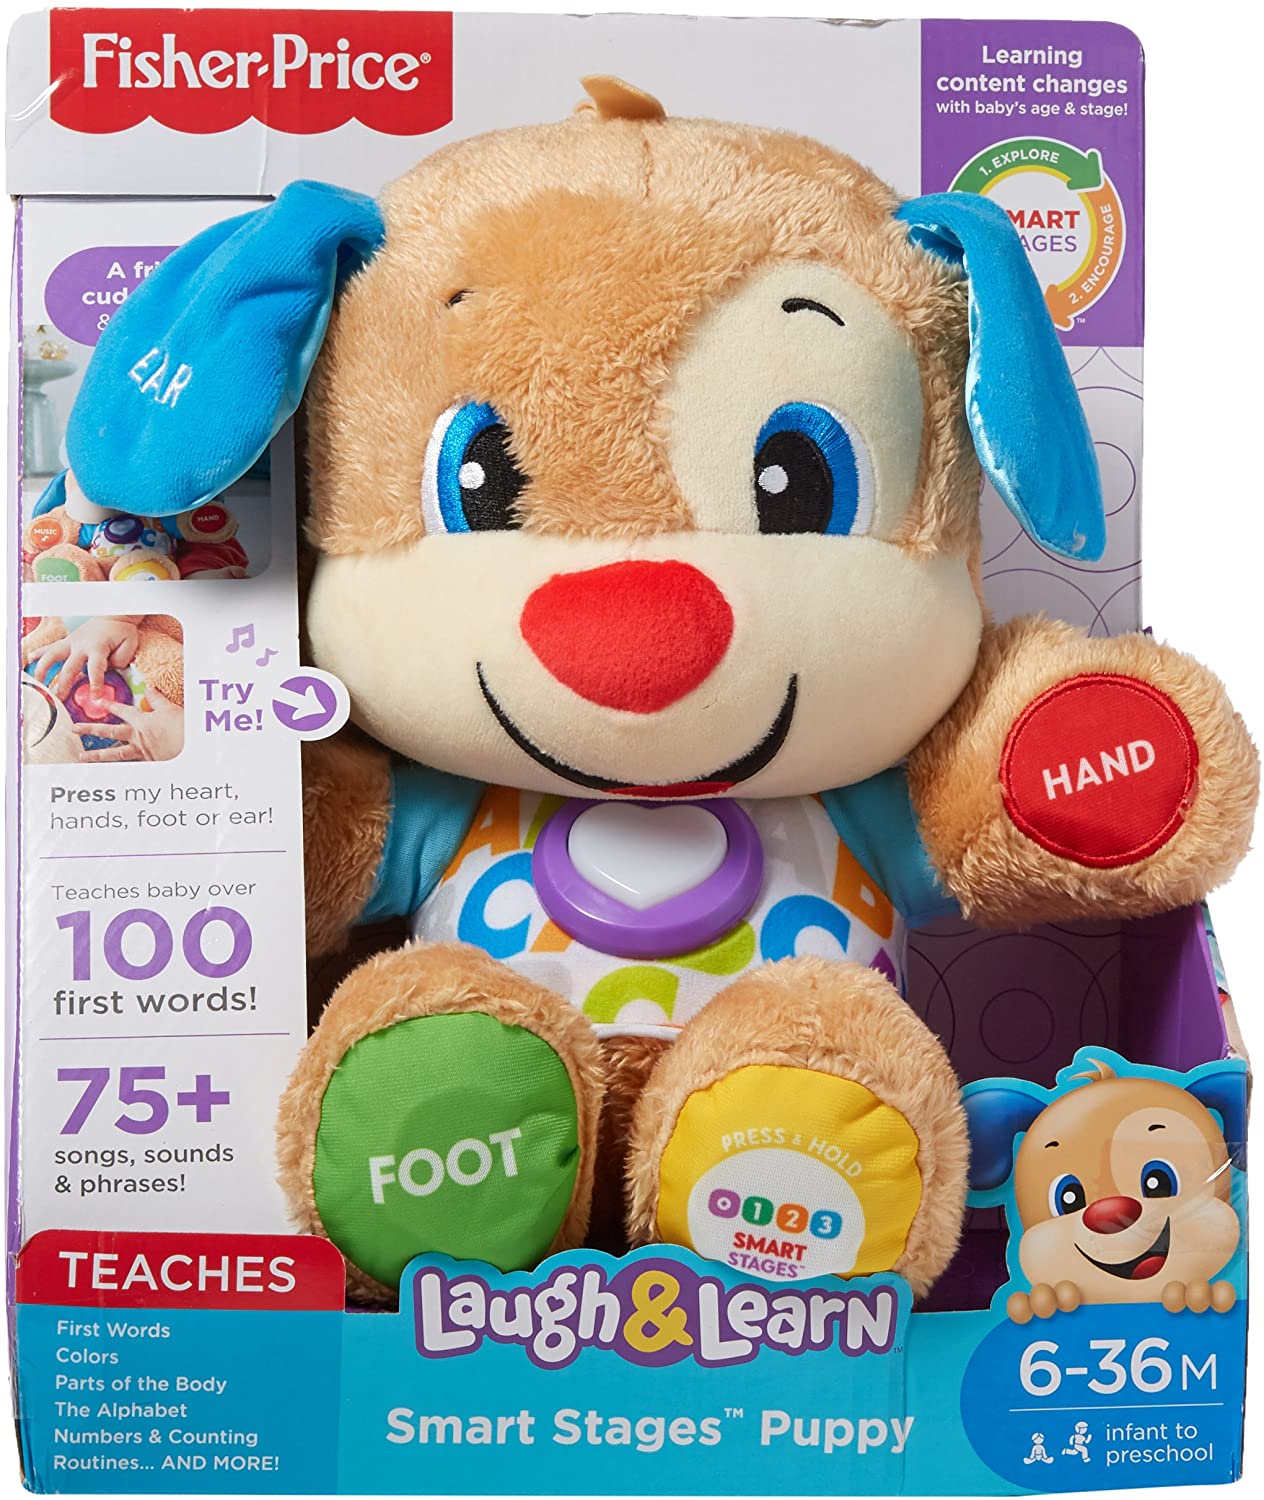 Puppy Laugh & Learn Fisher Price